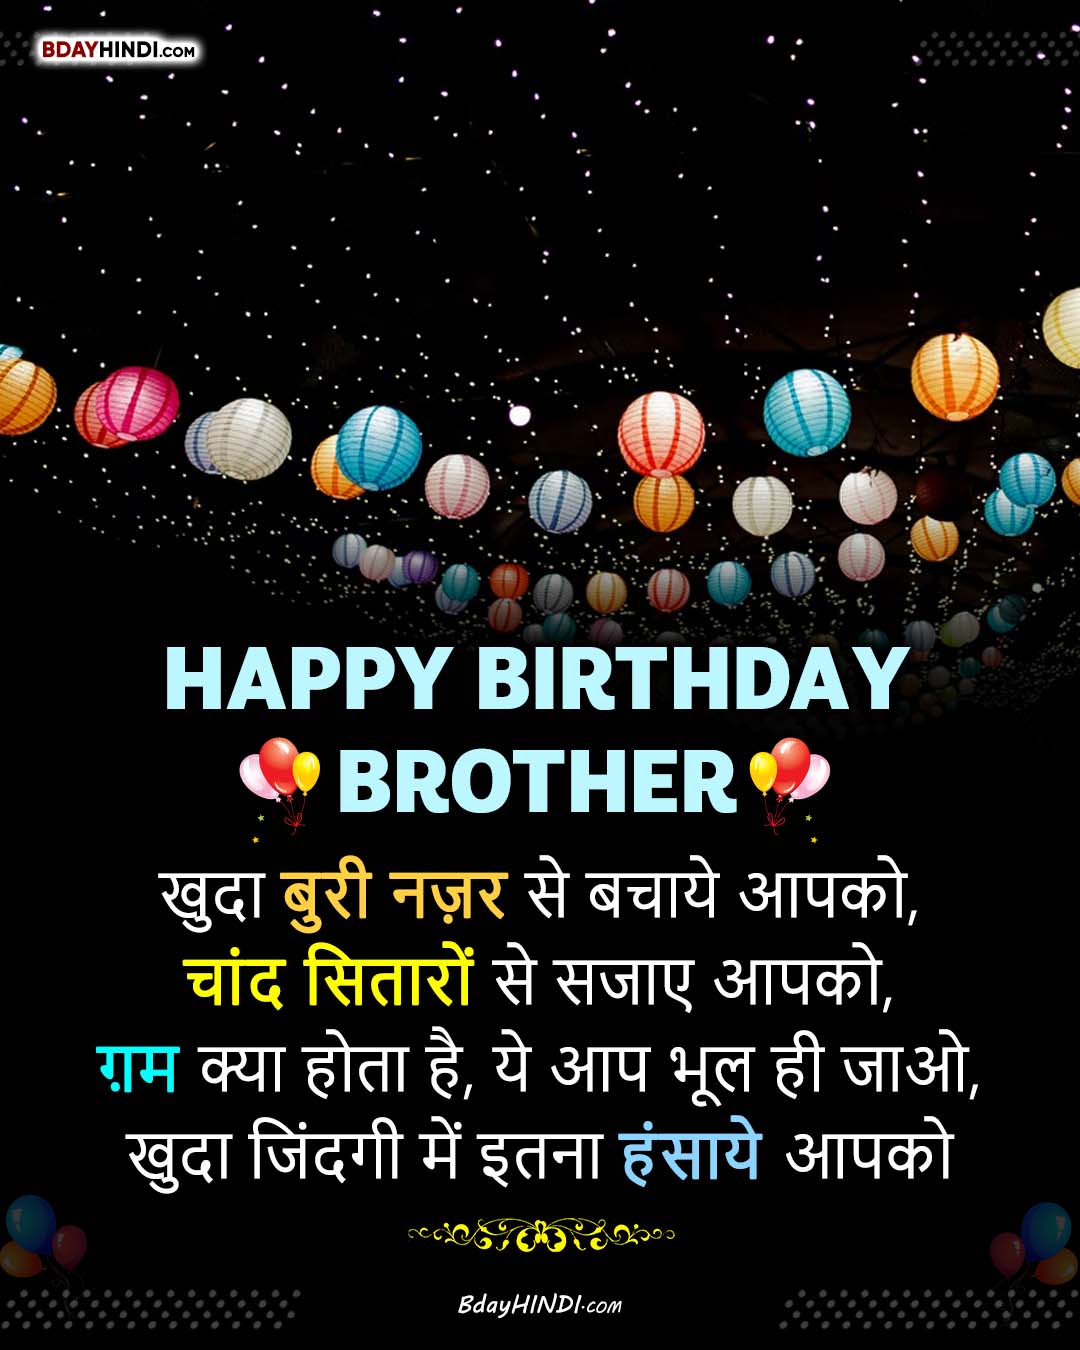 Happy Birthday Status for Brother in Hindi